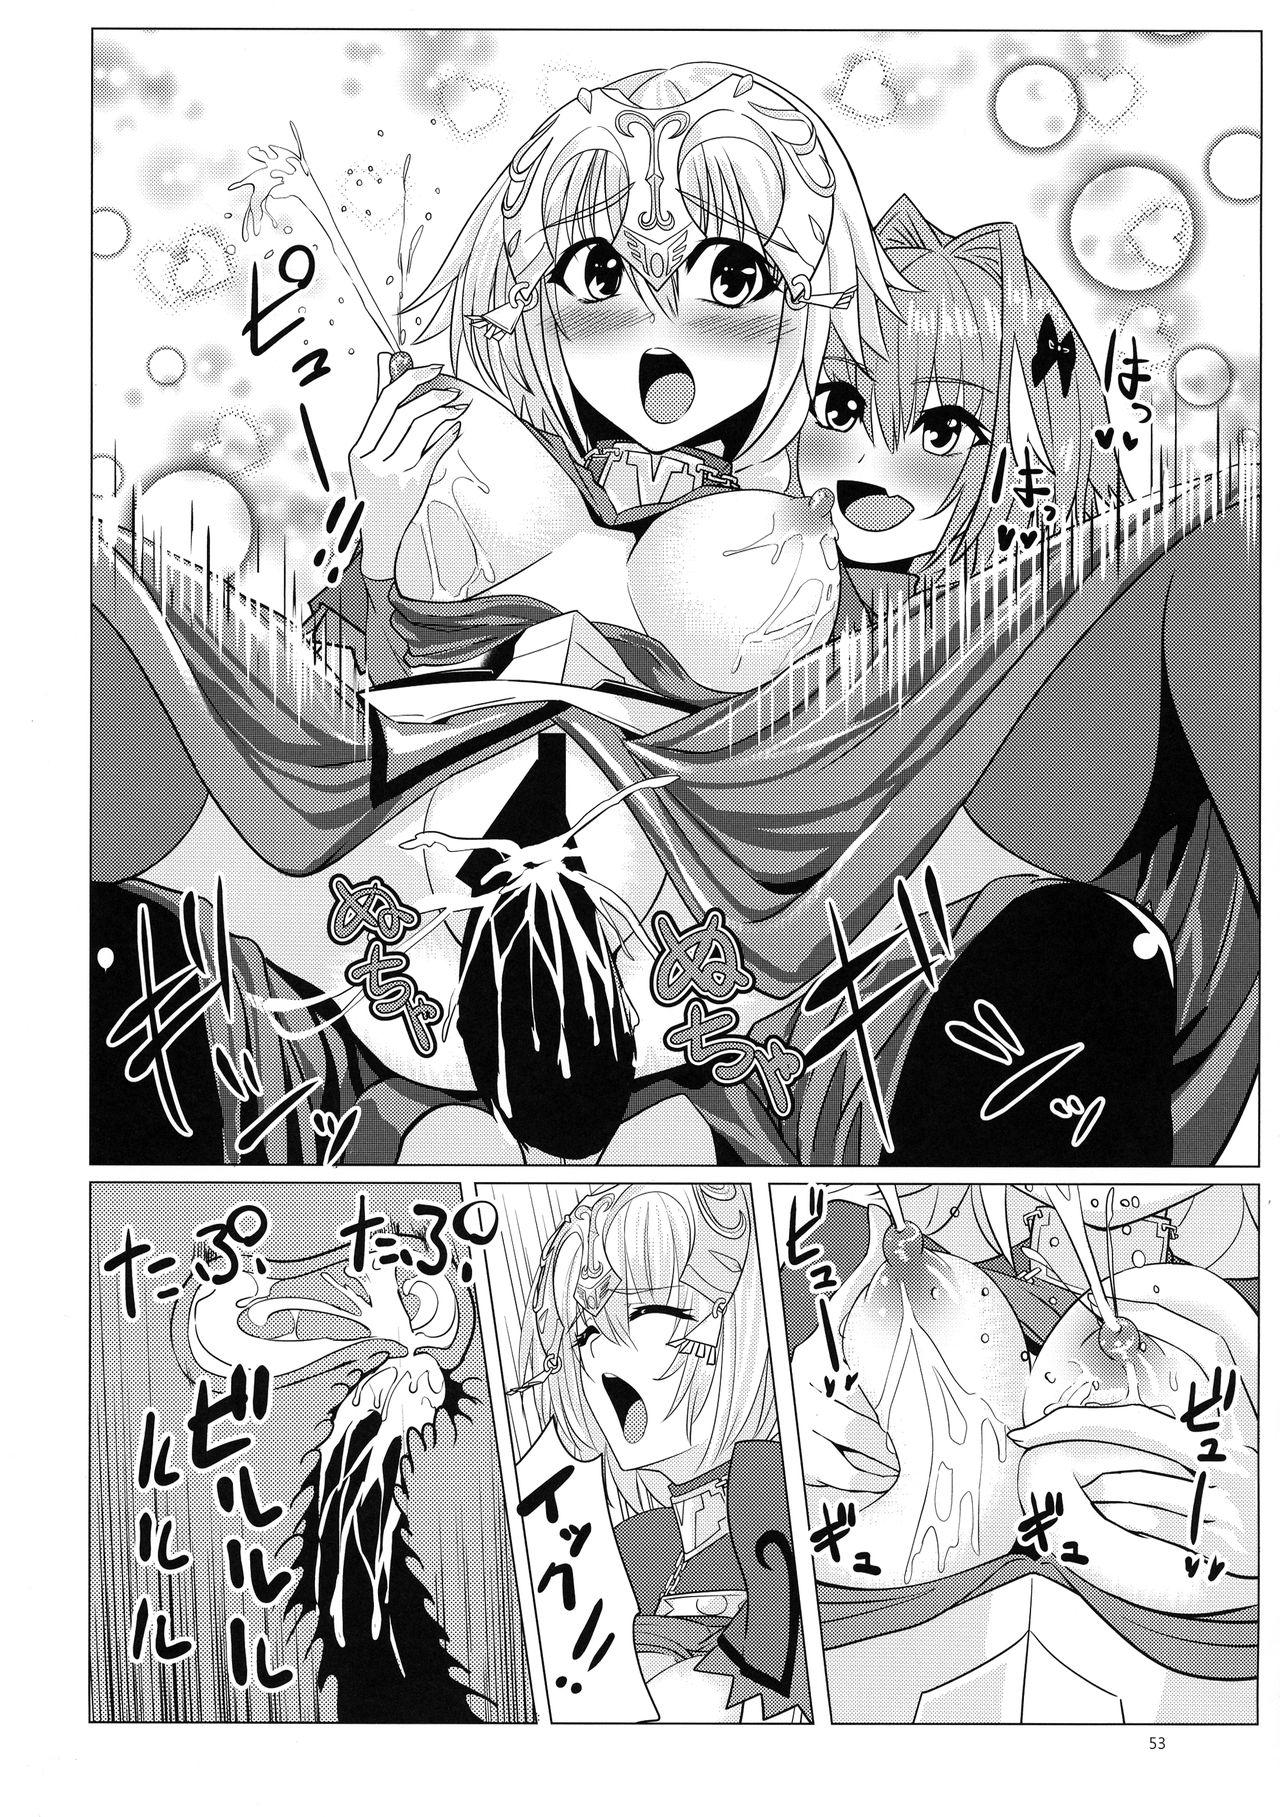 Matching Spirits - Jeanne and Astolfo have sex 49